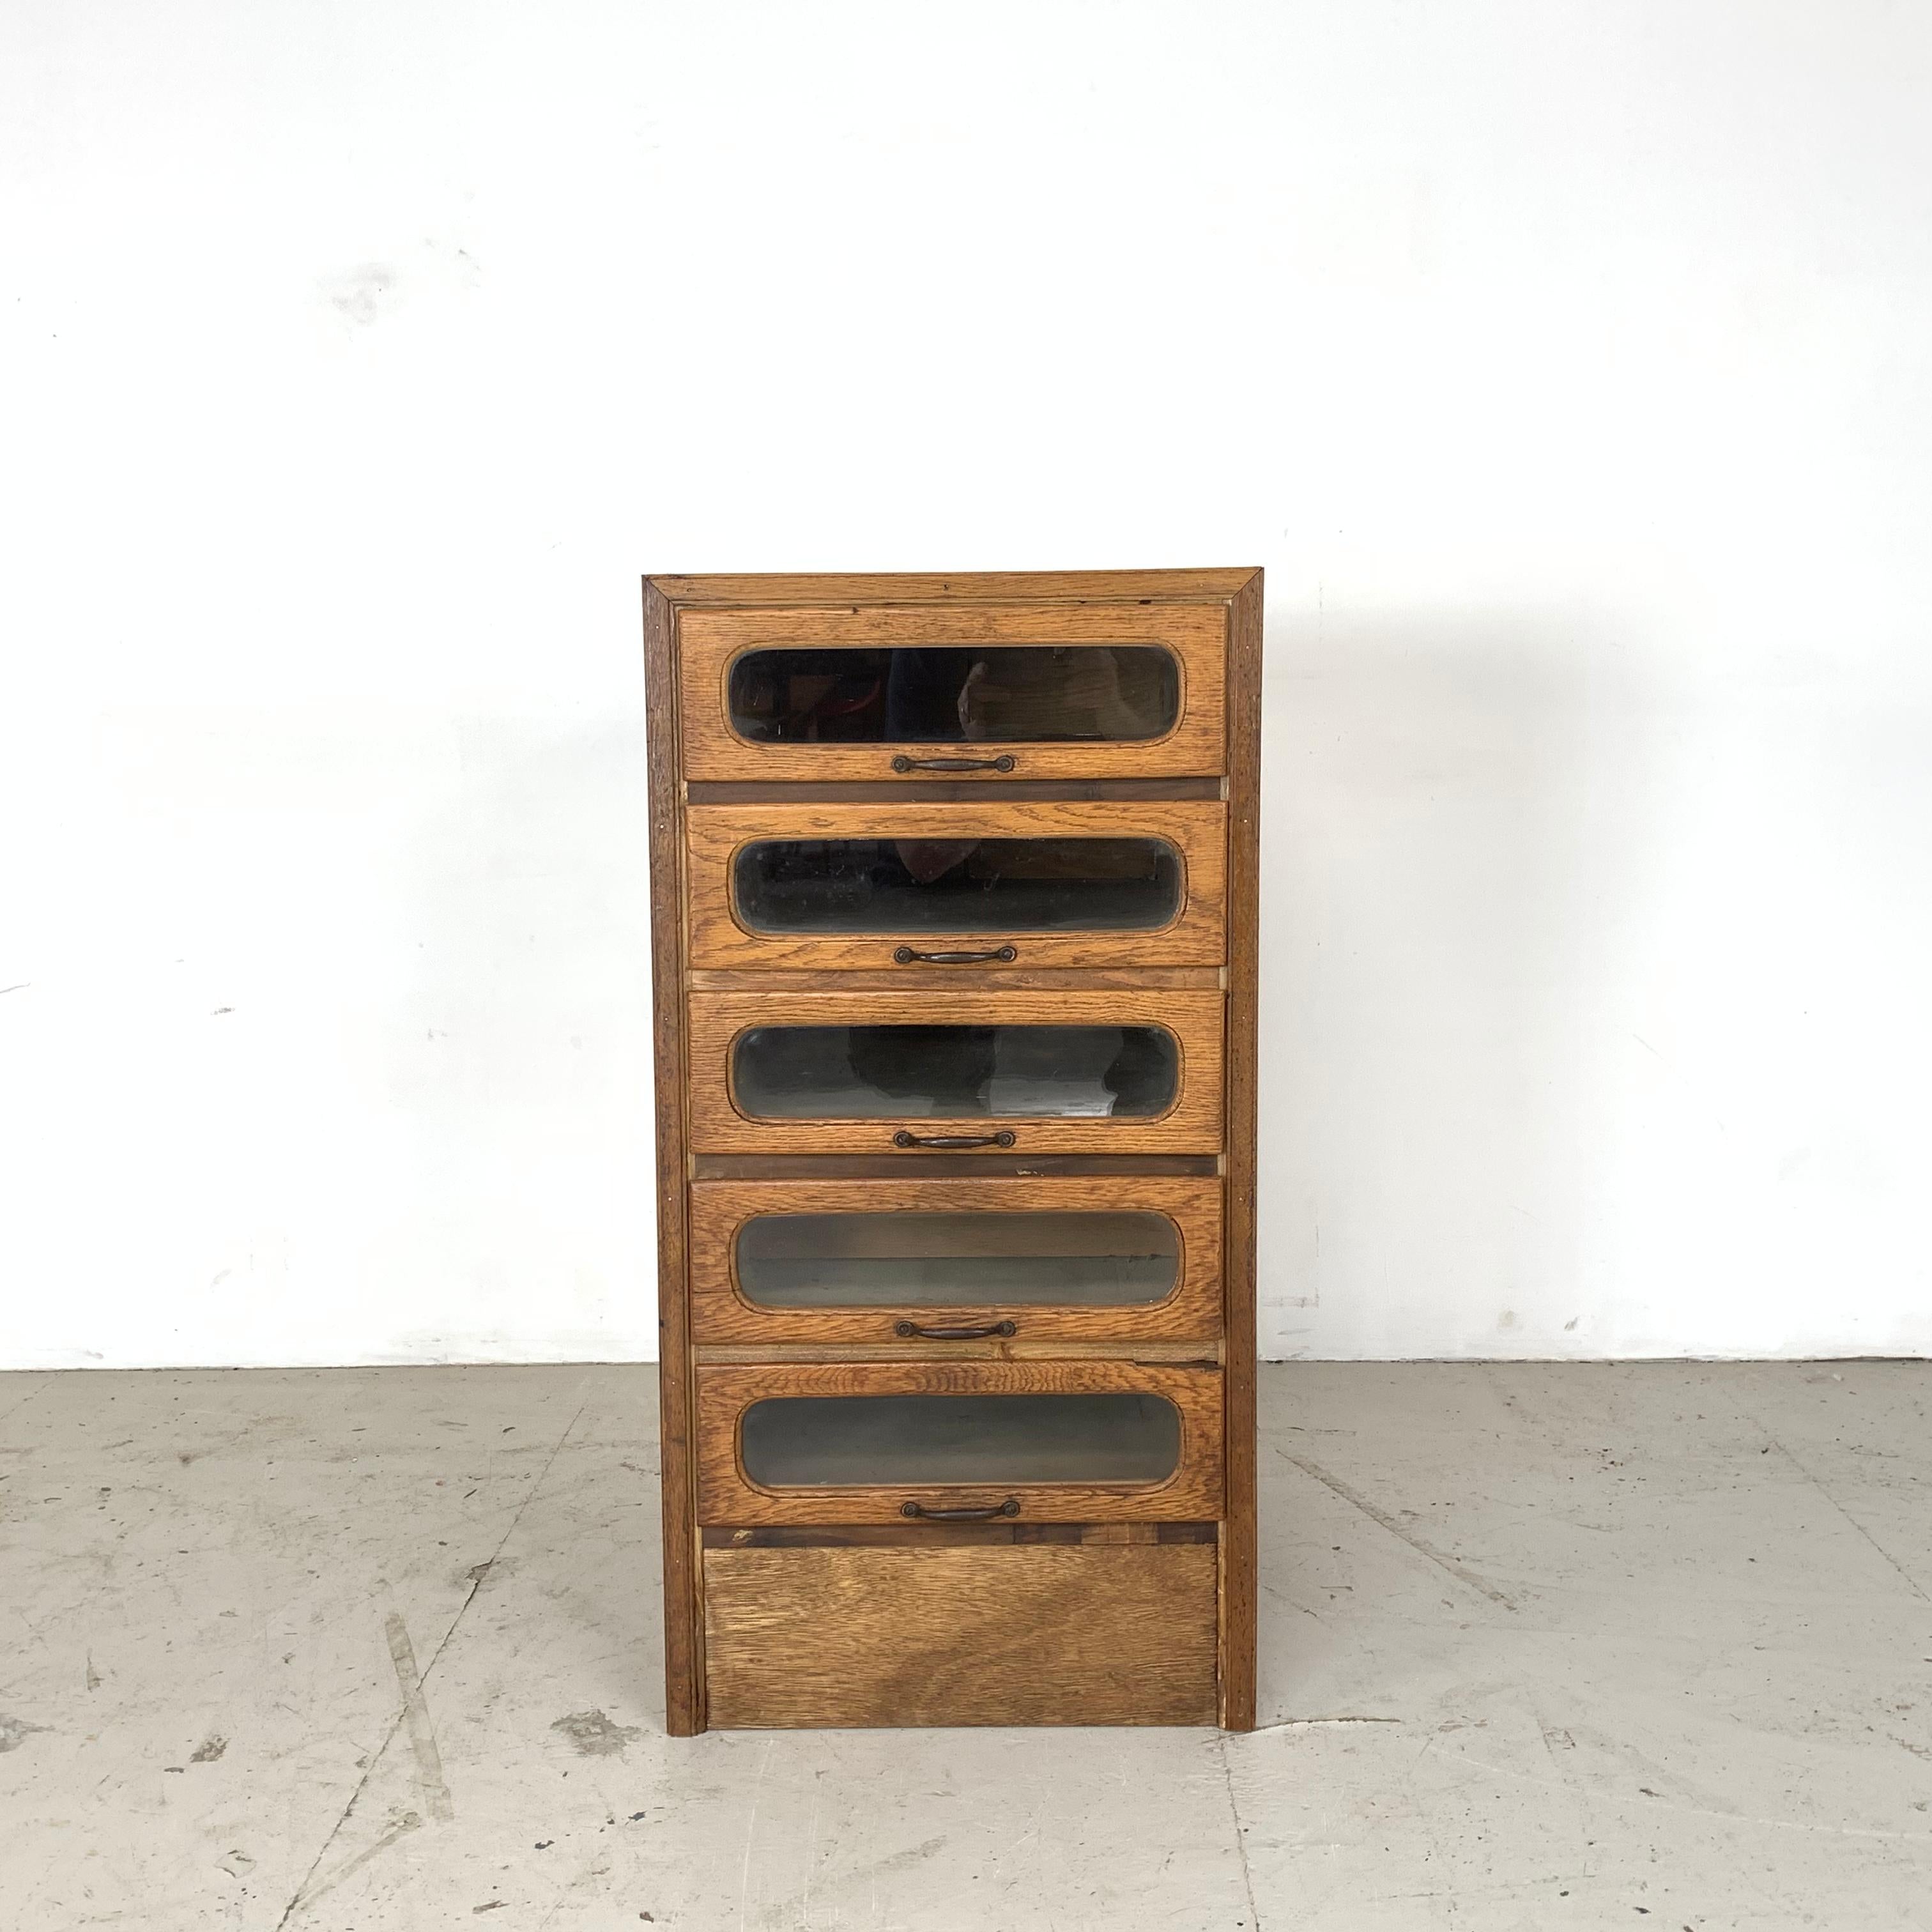 5 drawer single column haberdashery shop cabinet. 

It has 5 glass fronted drawers, all with original wooden handles.

Approximate dimensions:

Height 84 cm

Width 43 cm

Depth 54 cm

Drawers 34.5 cm x 48 cm x 10 cm.

Overall in good